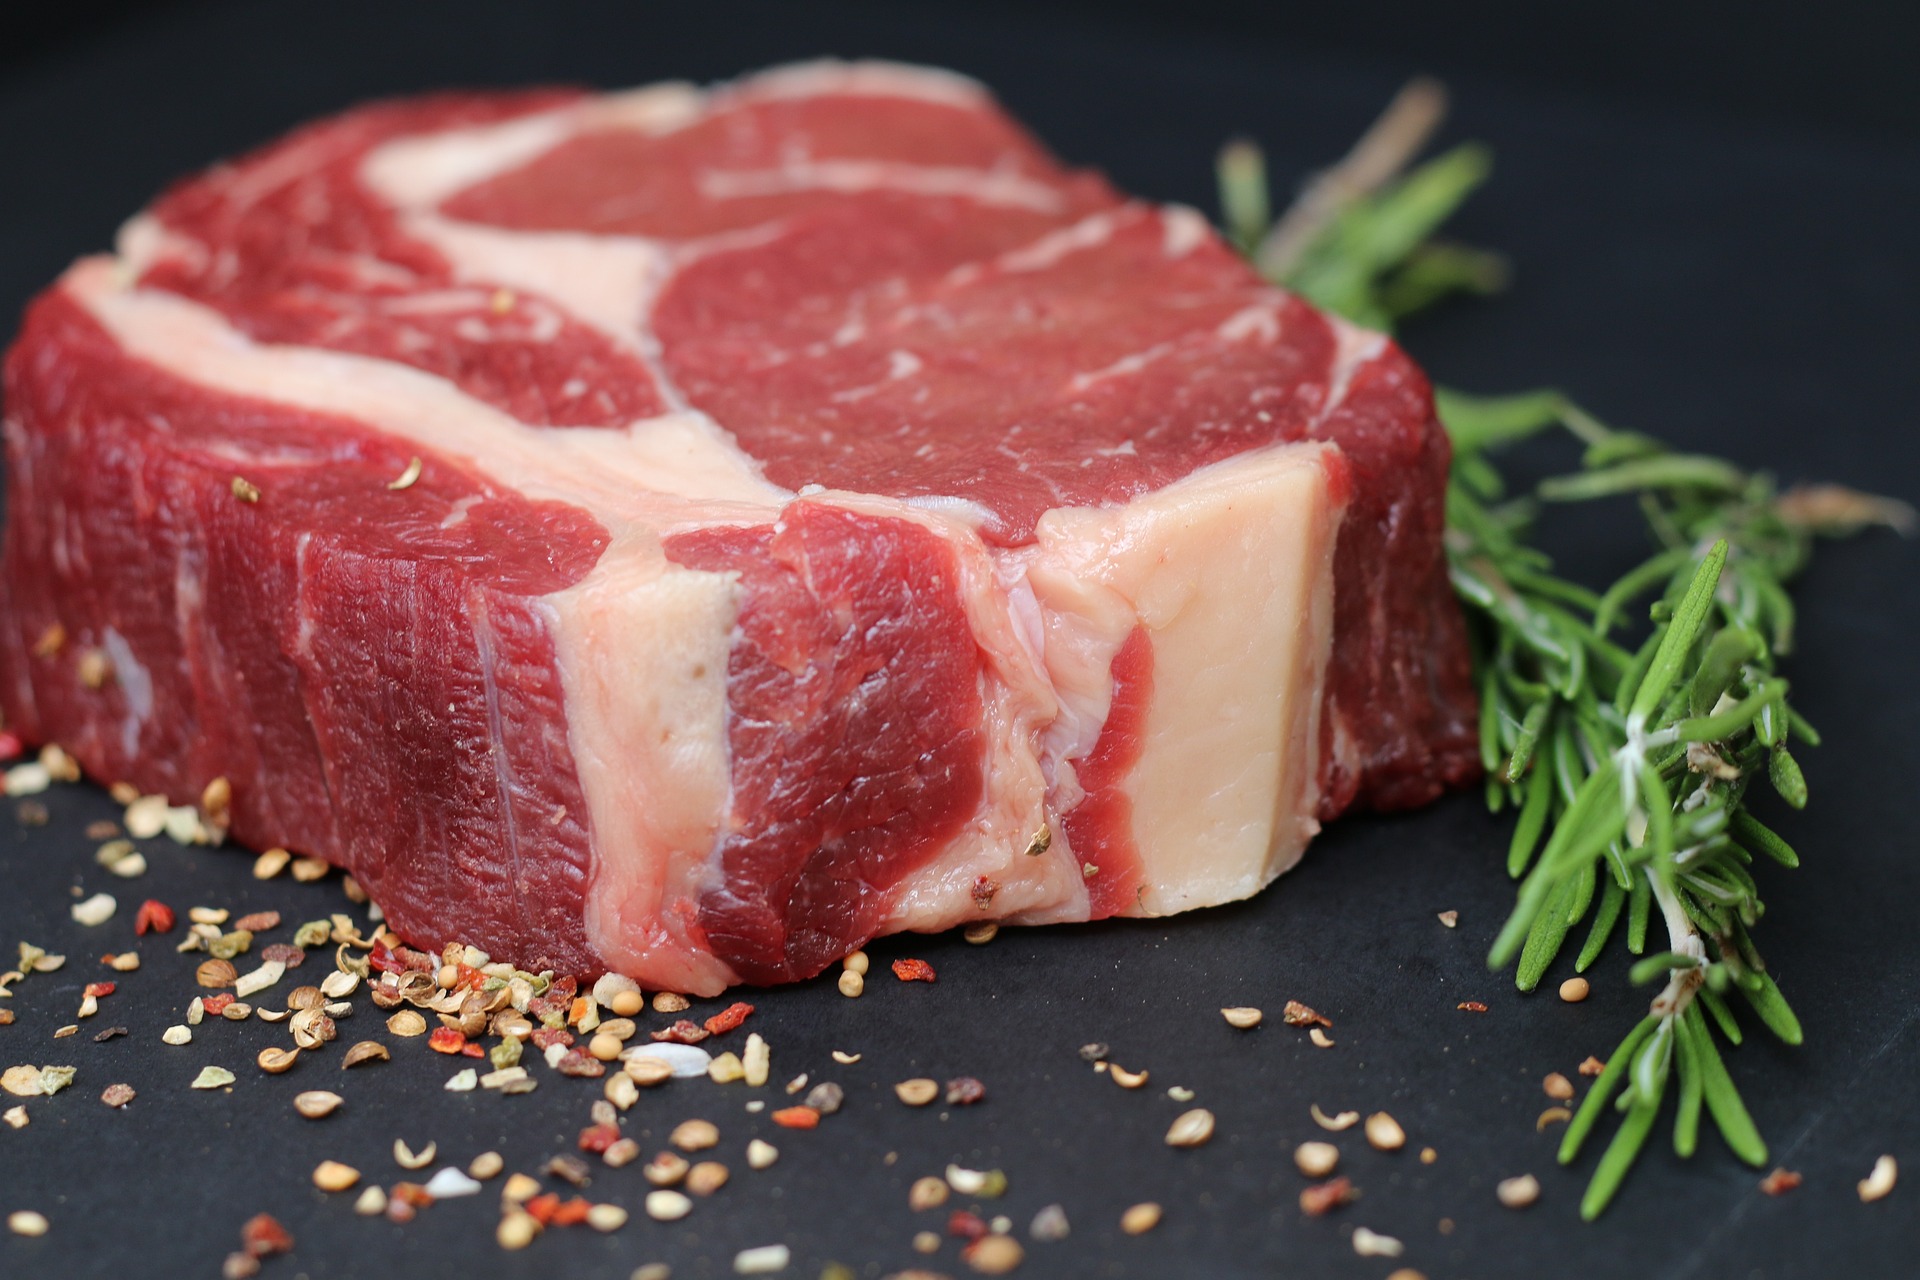 Does eating red meat cause cancer?